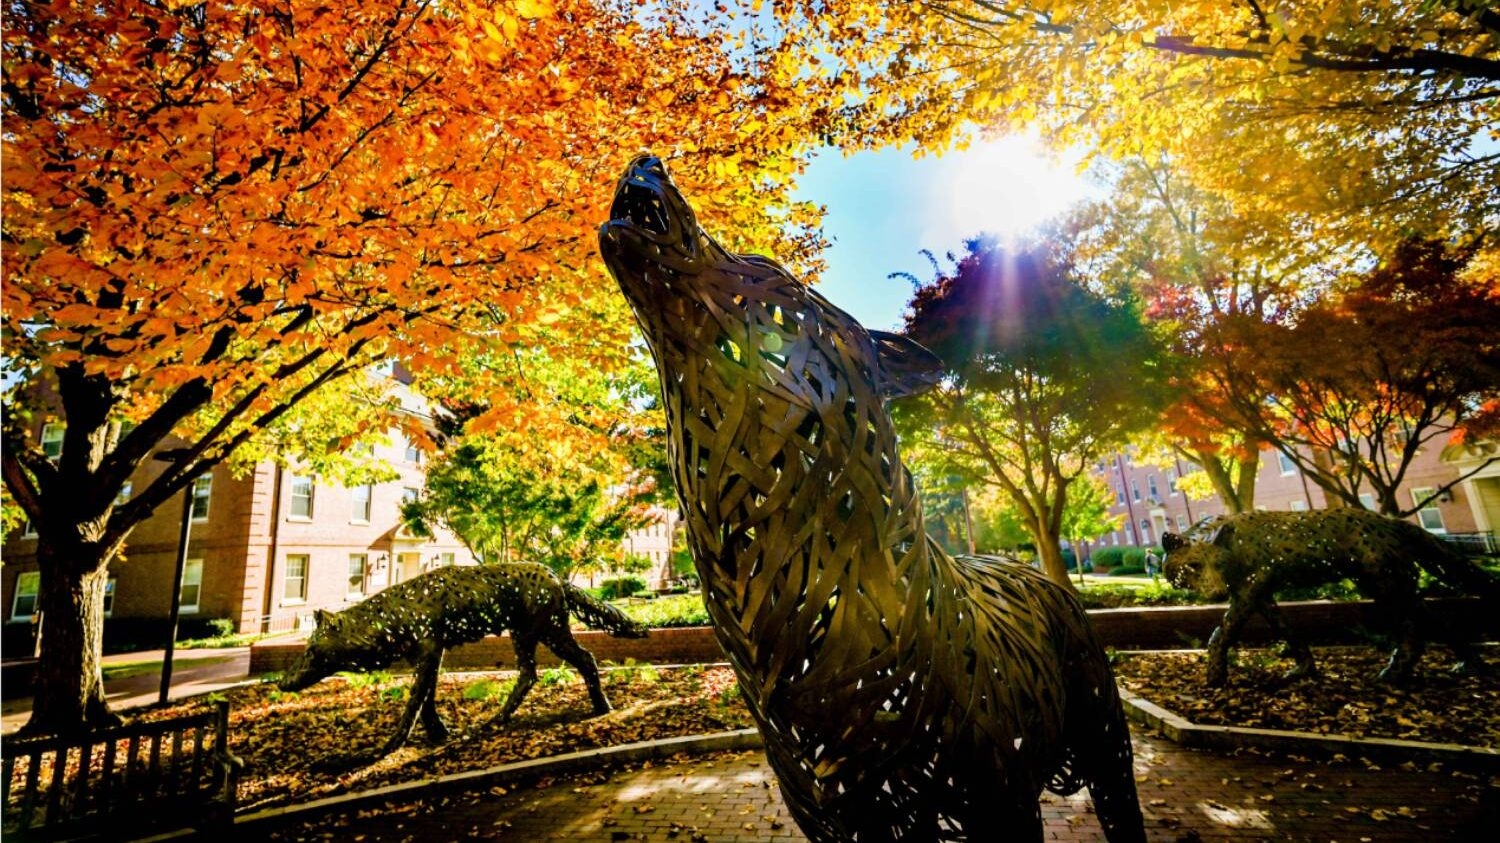 Afternoon sunlight streams through the fall foliage at Wolf Plaza. Photo by Becky Kirkland.